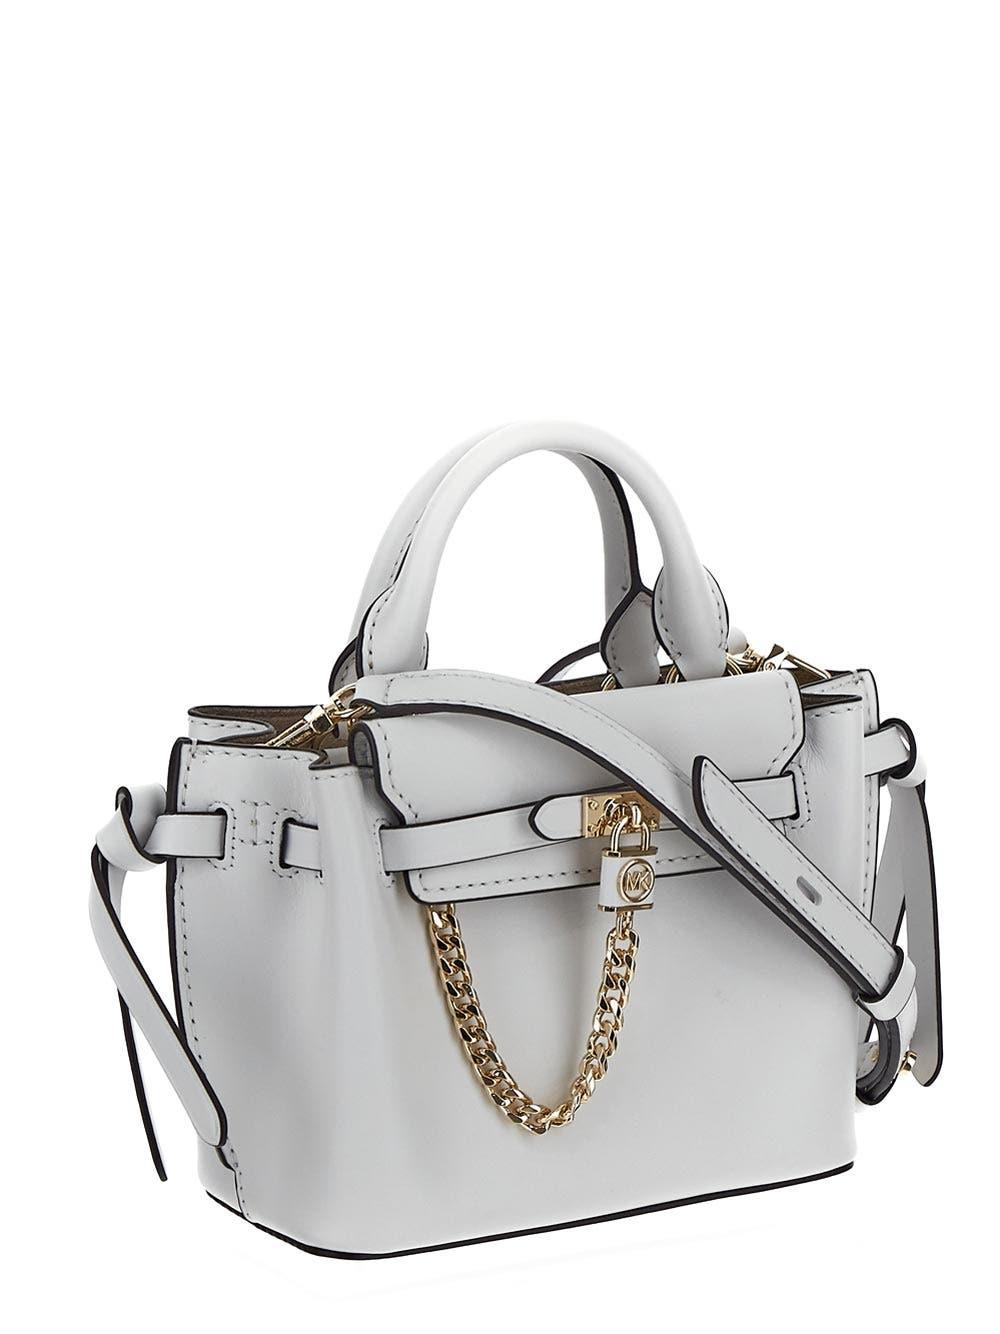  Michael Kors Hamilton Legacy Small Leather Belted